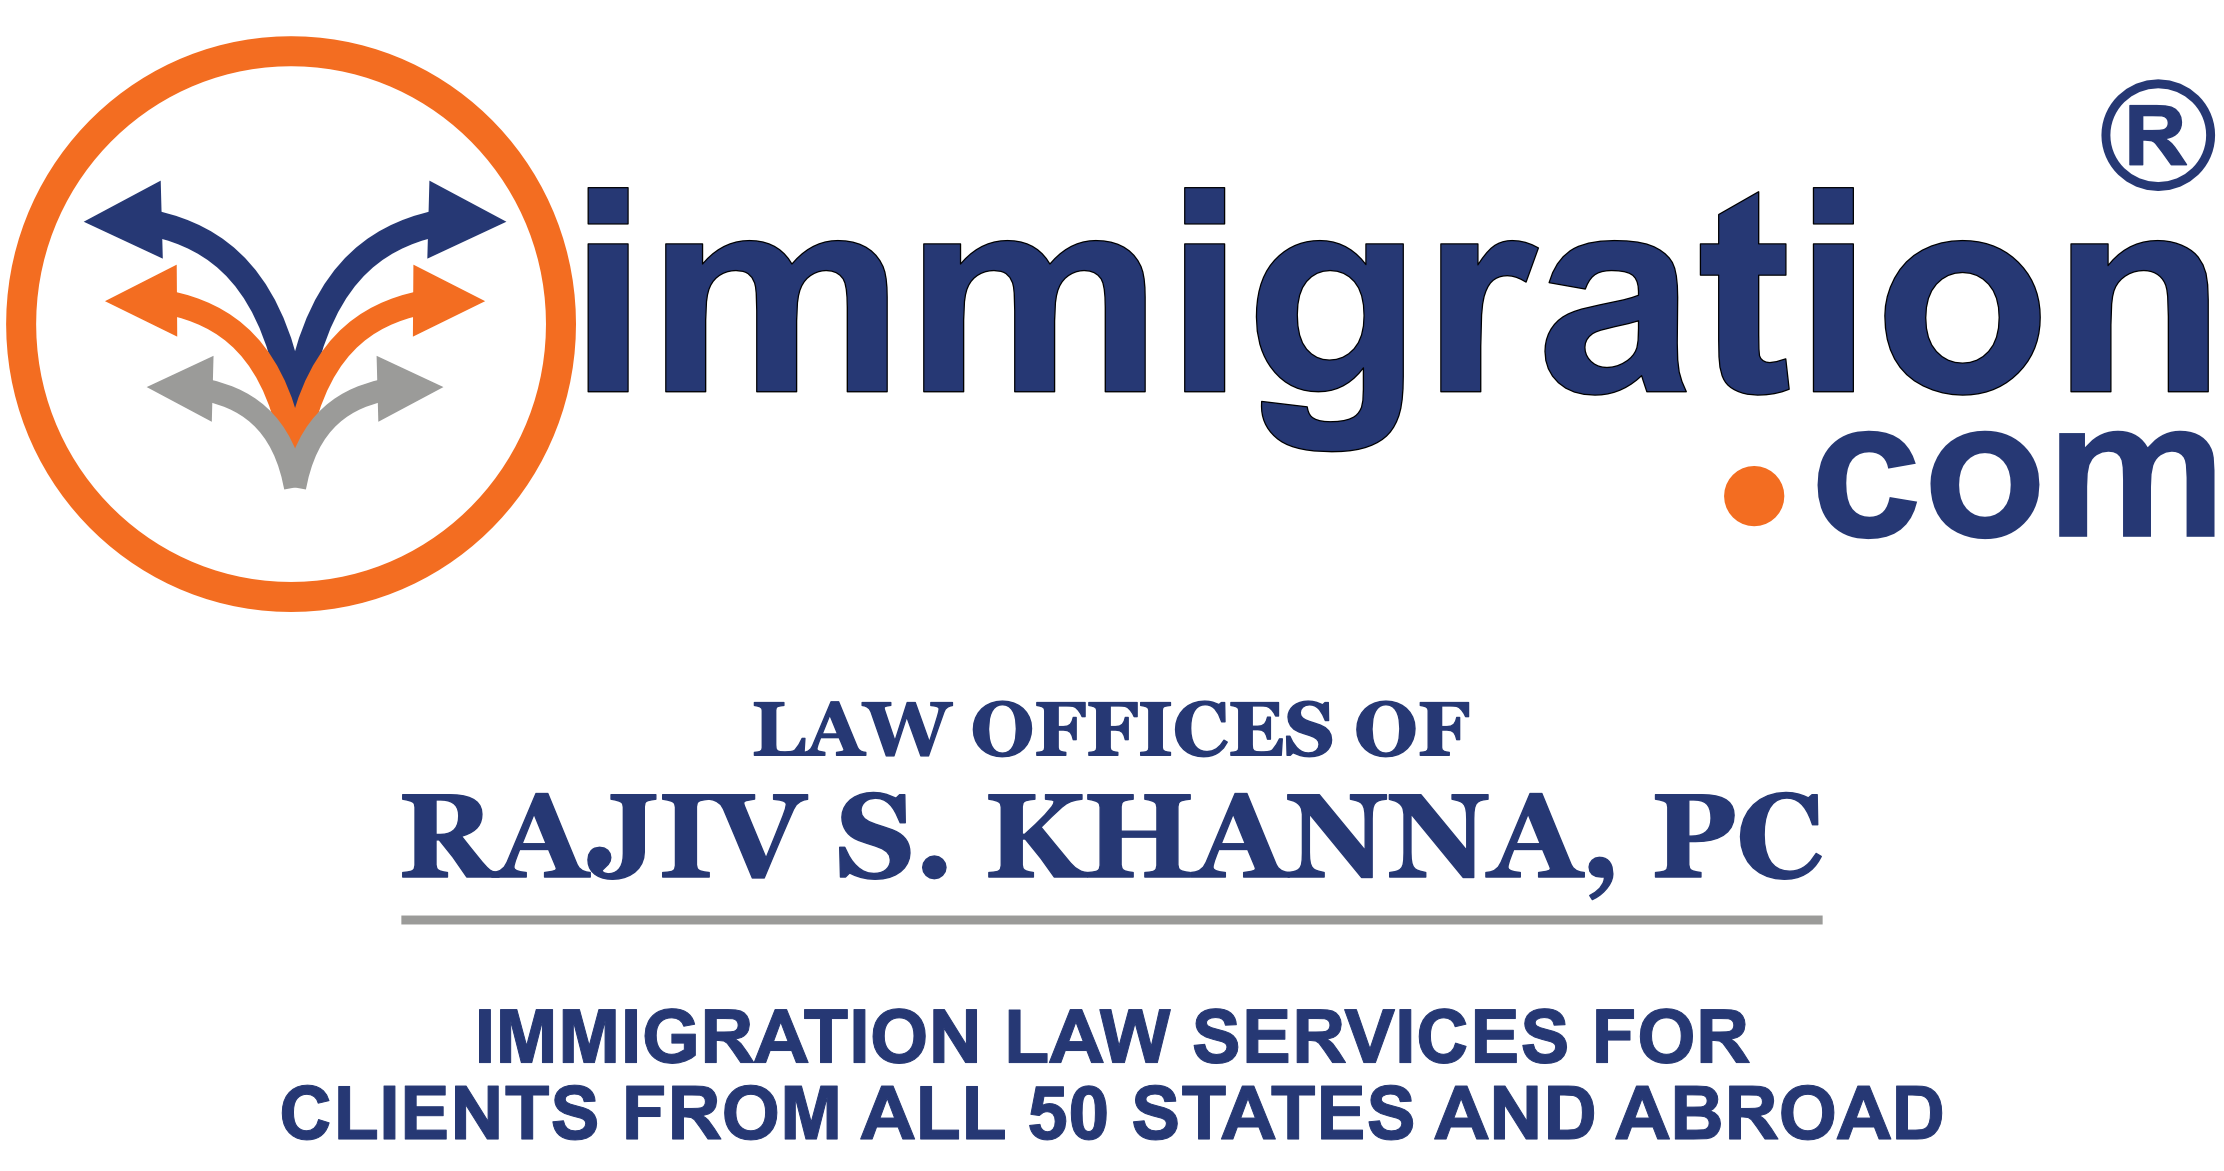 US Immigration forums hosted by the Law offices of Rajiv S. Khanna, PC for the community. We take no responsibility for the information presented here.